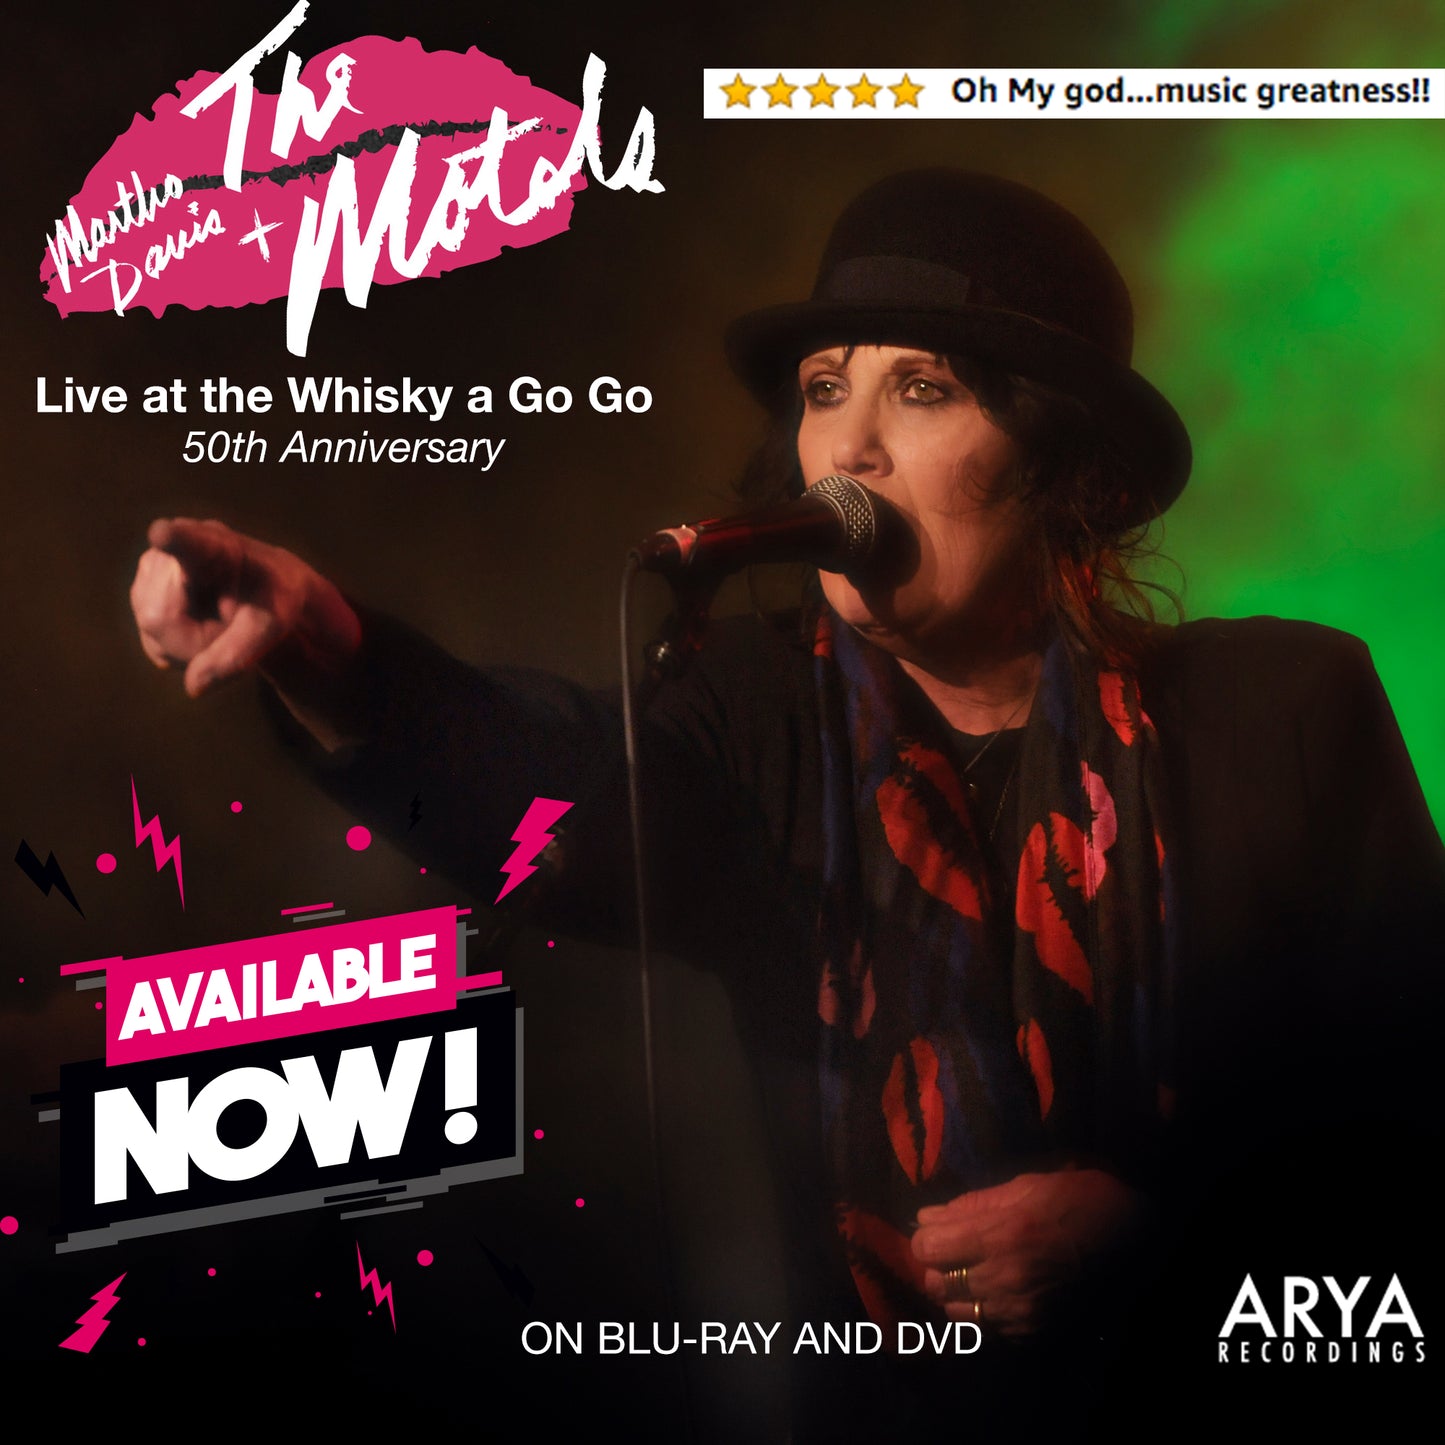 Motels: Live at the 50th Anniversary of the Whisky a GoGo - DVD